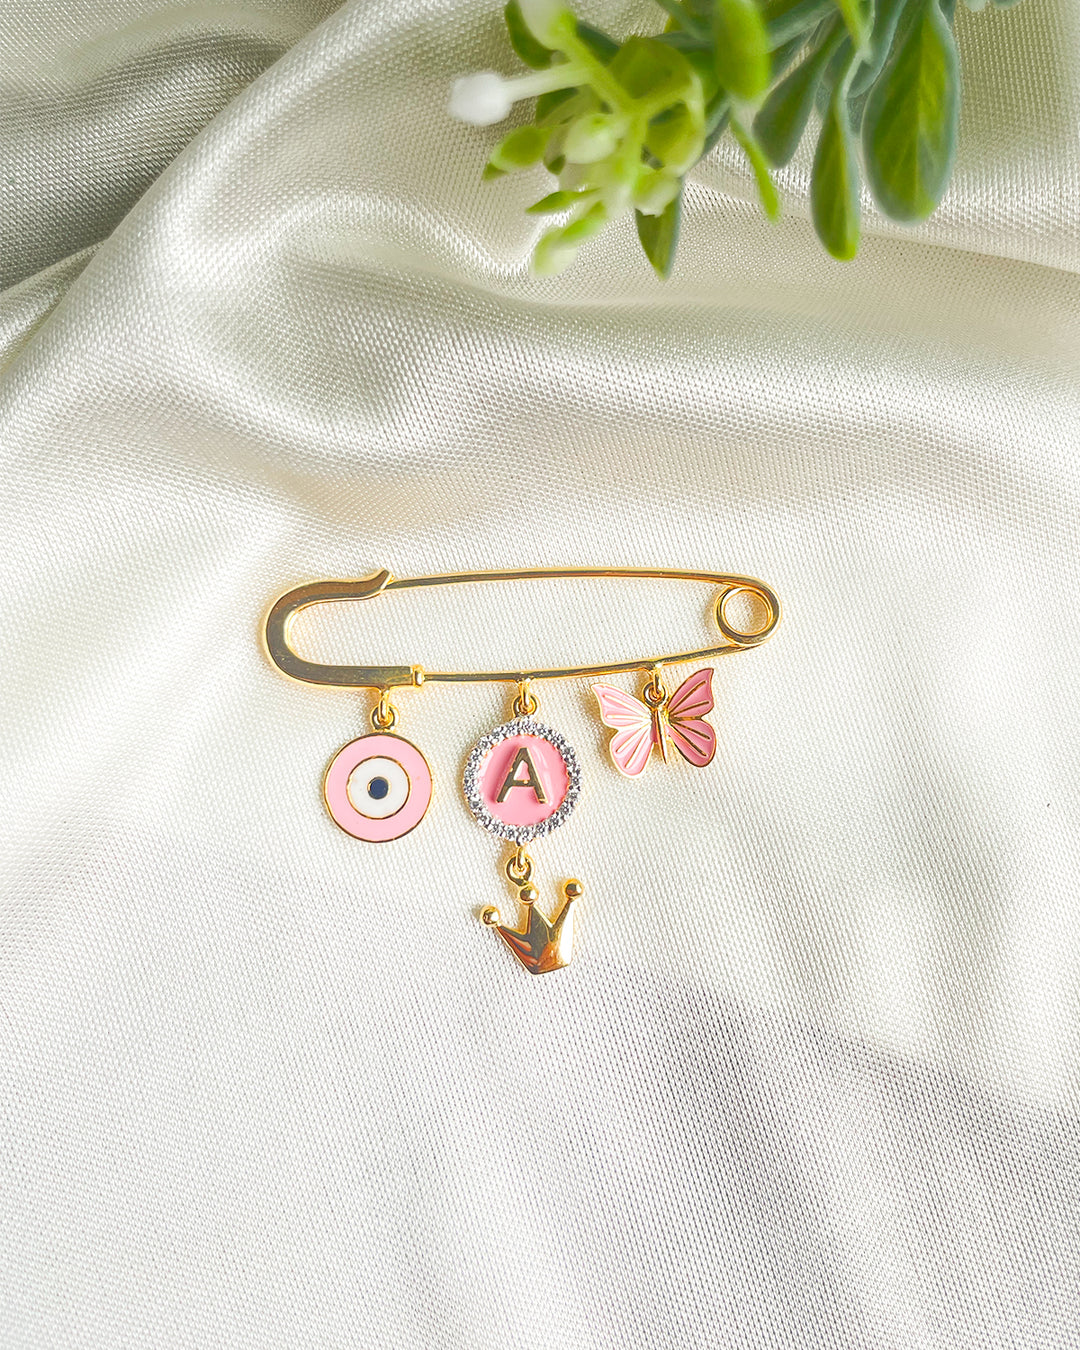 All Pink Lapel Pin